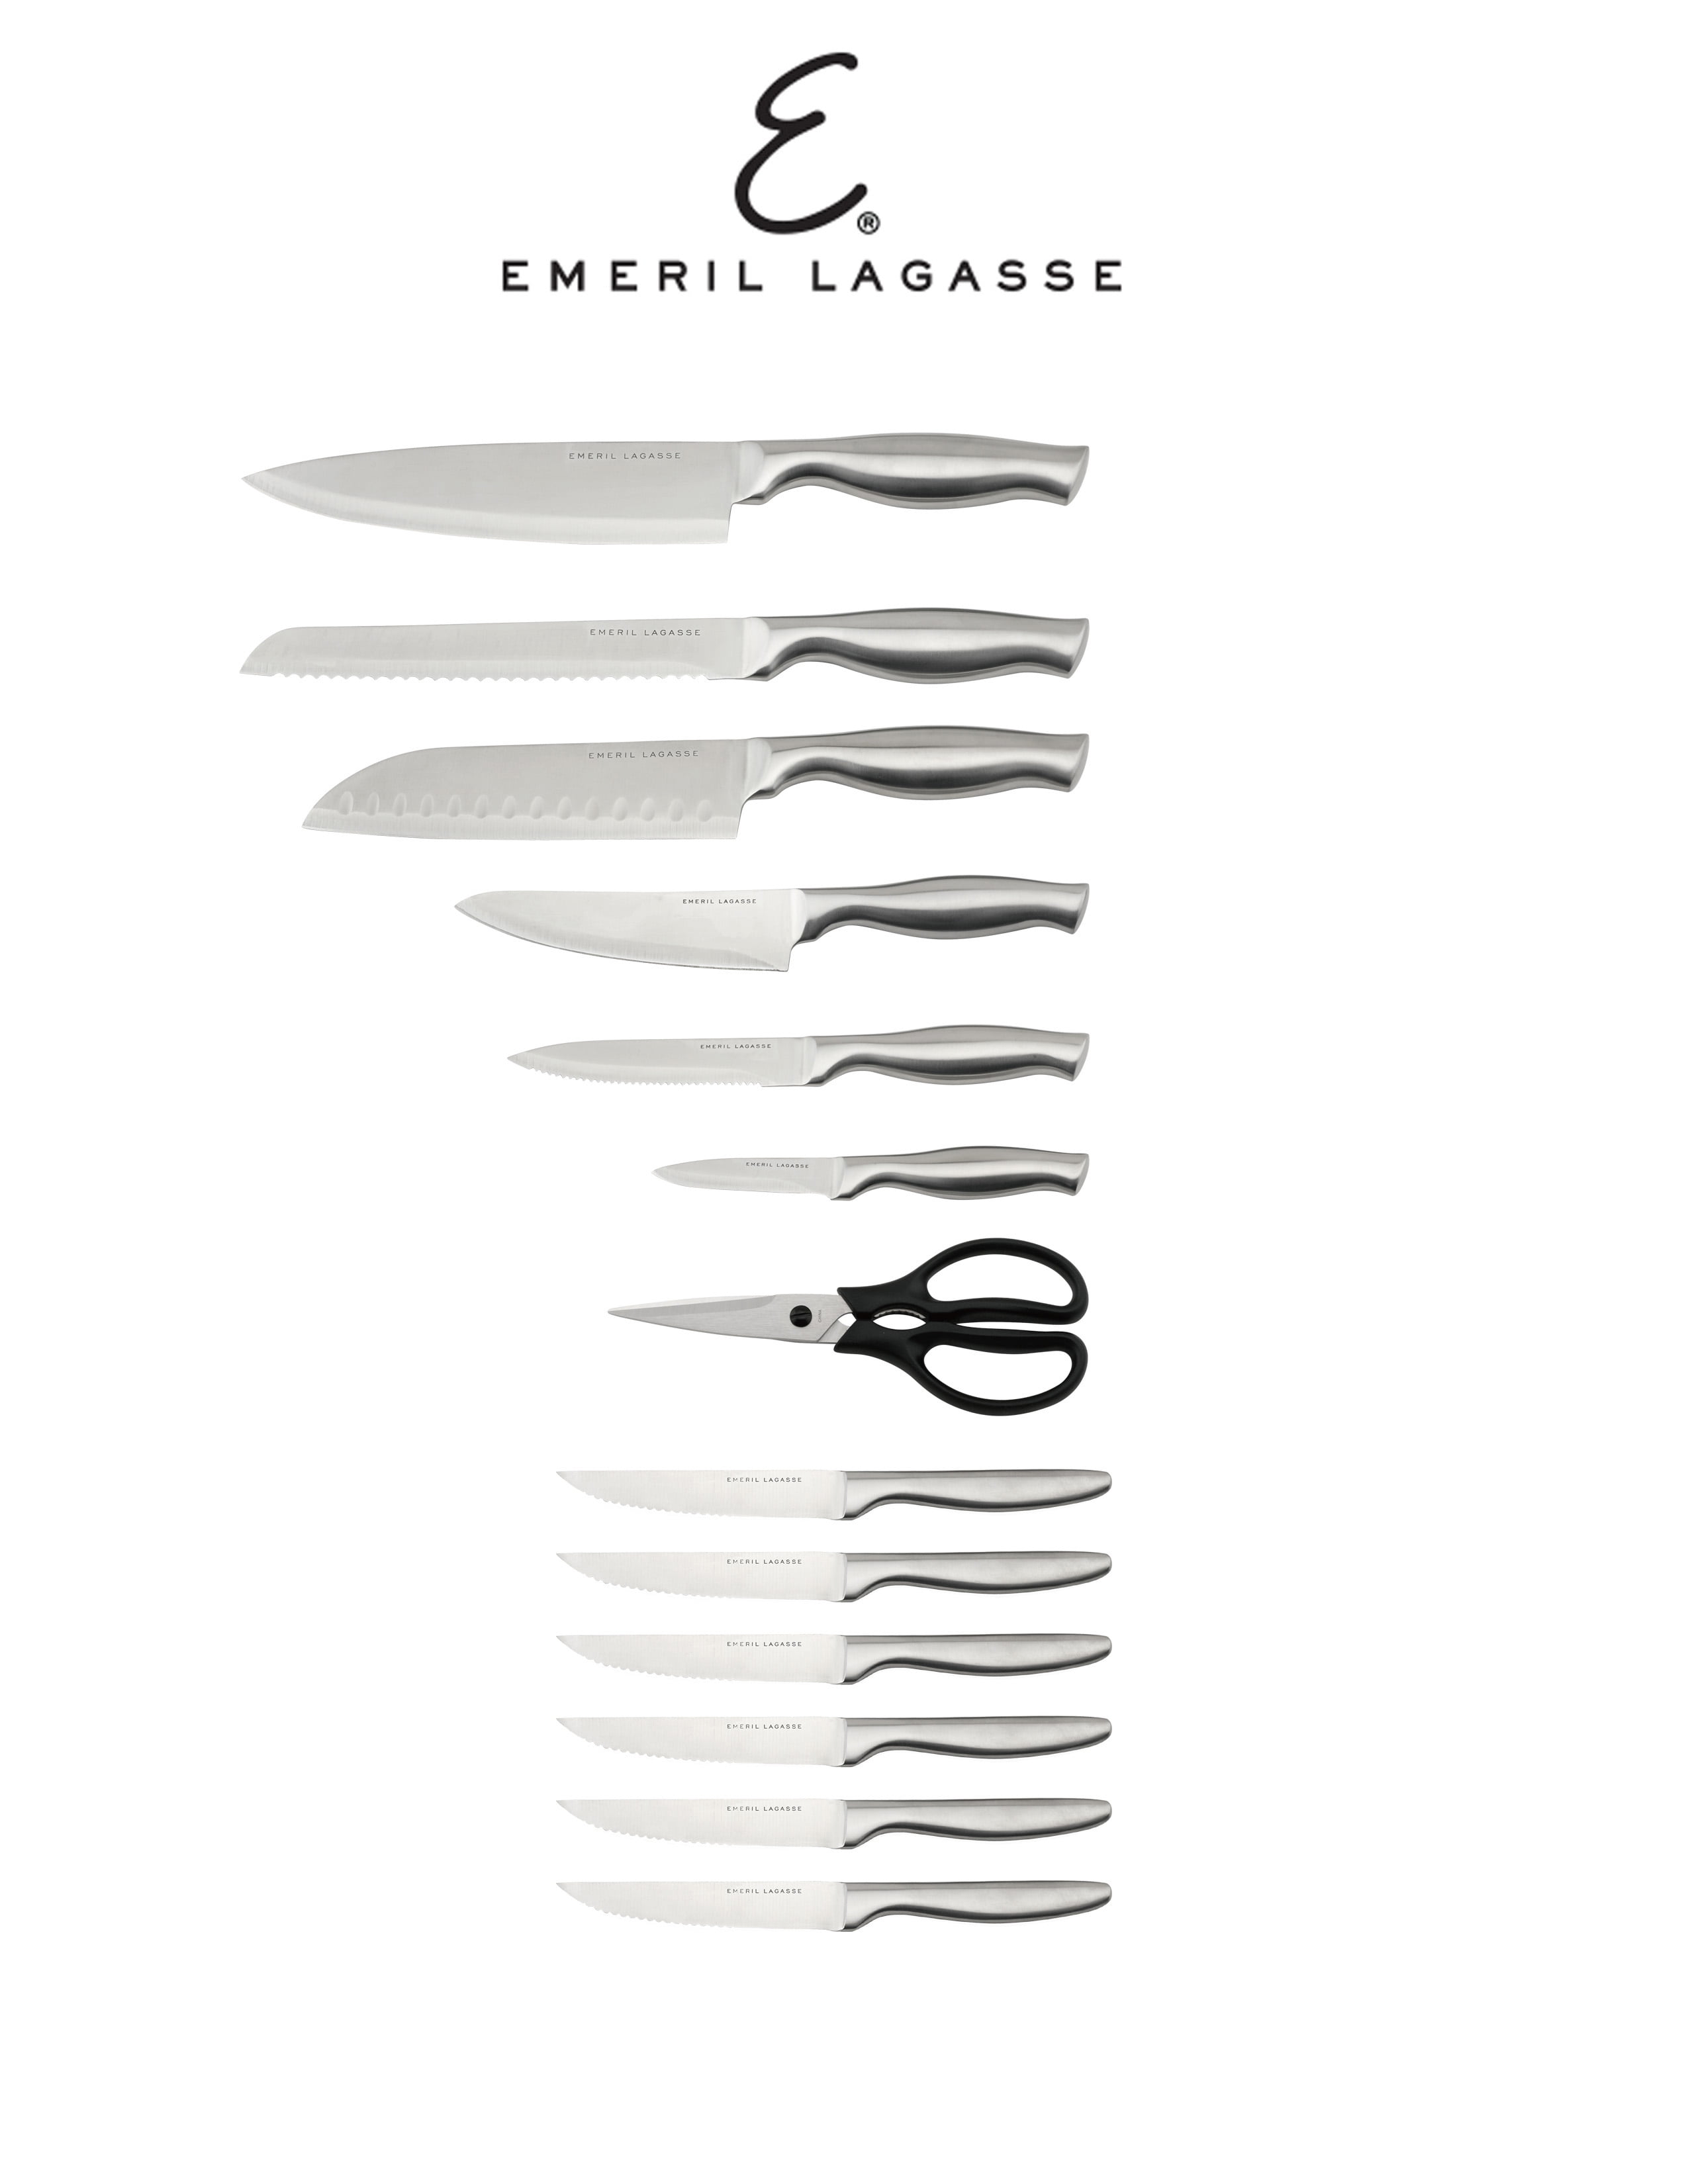 Class Action Lawsuit Says Emeril Lagasse Knives are Counterfeit